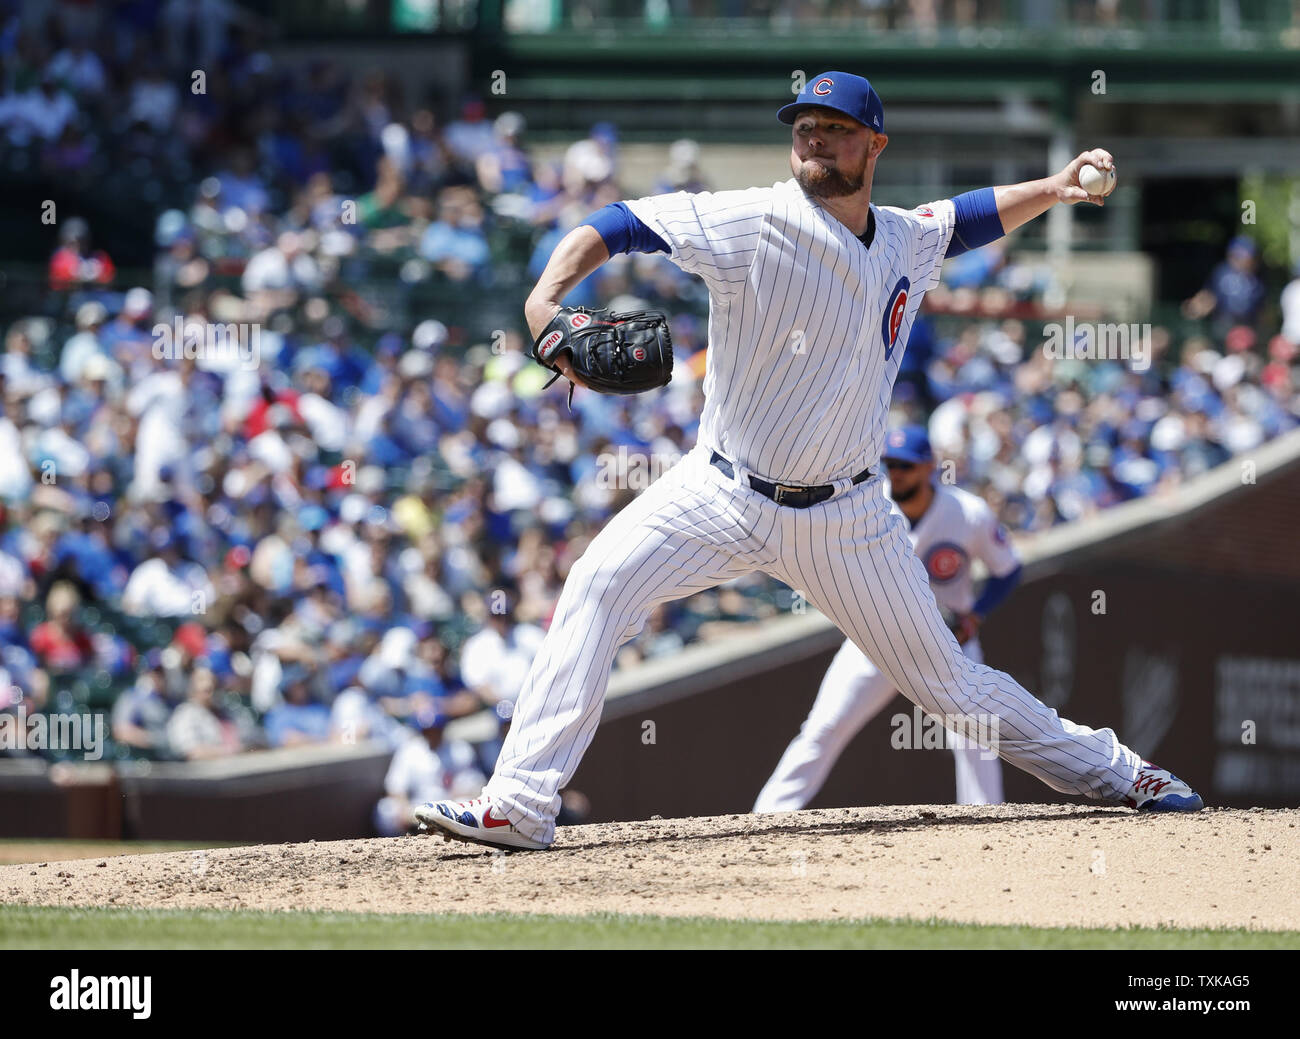 Chicago Cubs starting pitcher Jon Lester delivers against the Philadelphia Phillies in the fourth inning at Wrigley Field on May 23, 2019 in Chicago. Photo by Kamil Krzaczynski/UPI Stock Photo